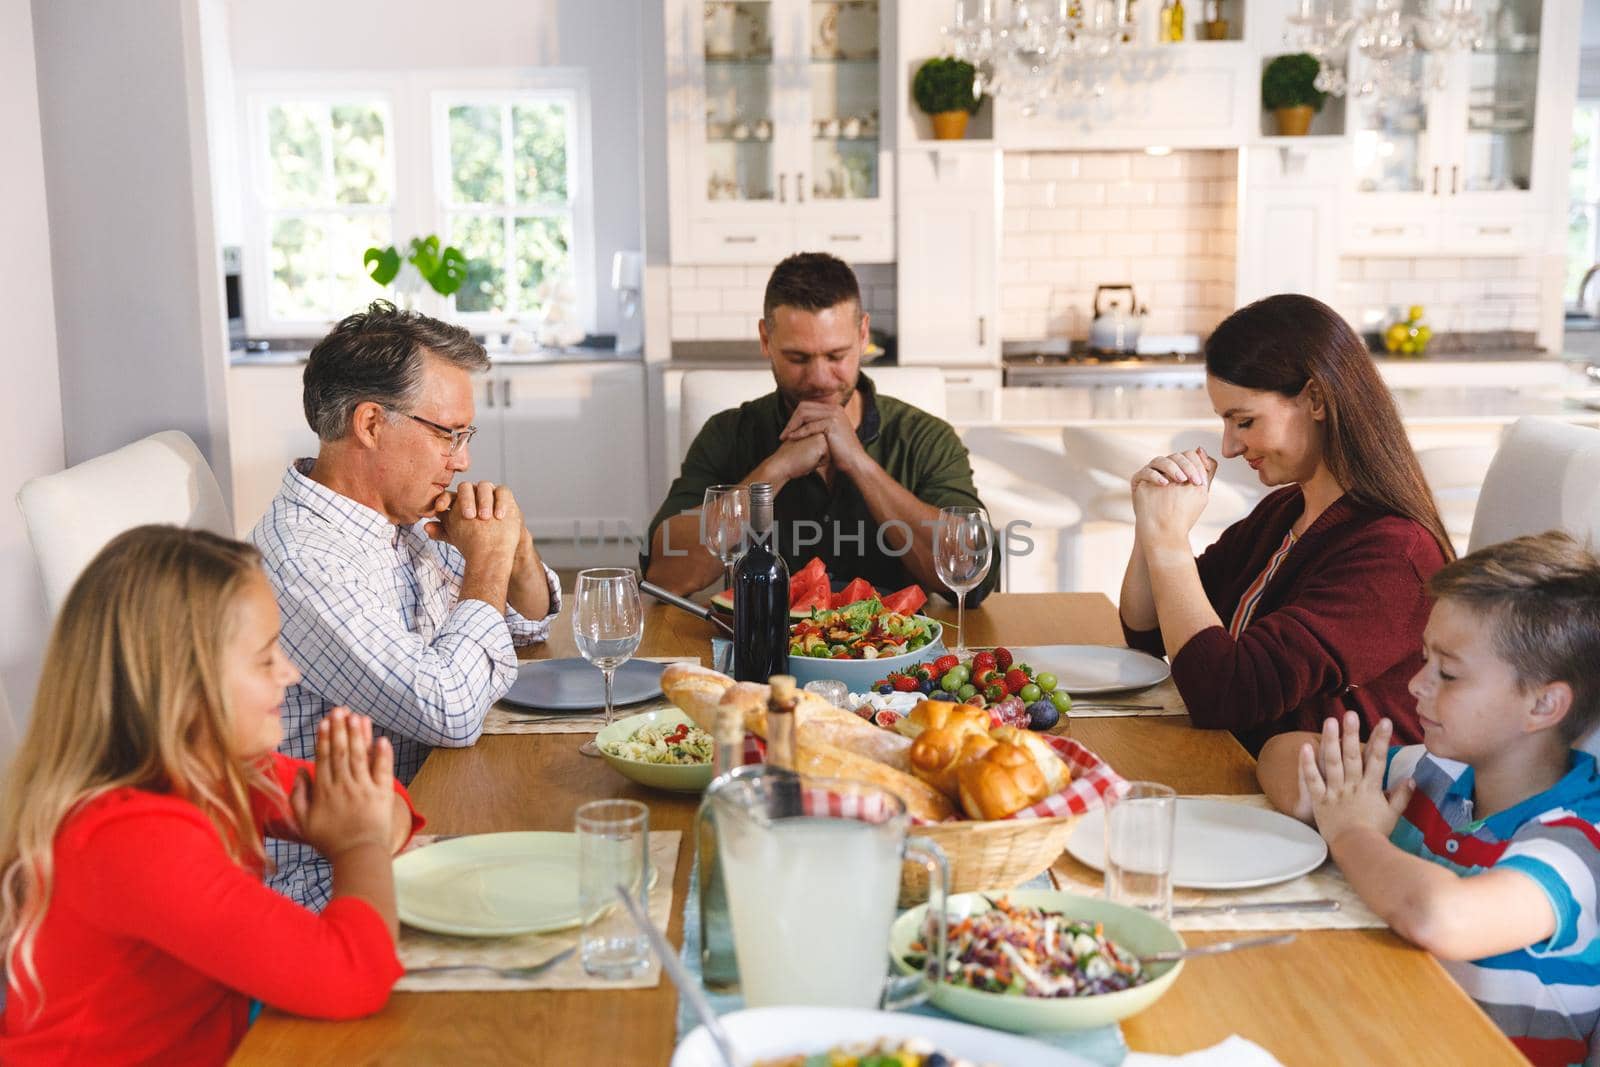 Caucasian grandfather and parents with son and daughter sitting at table and praying before dinner. family enjoying traditional mealtime together at home.